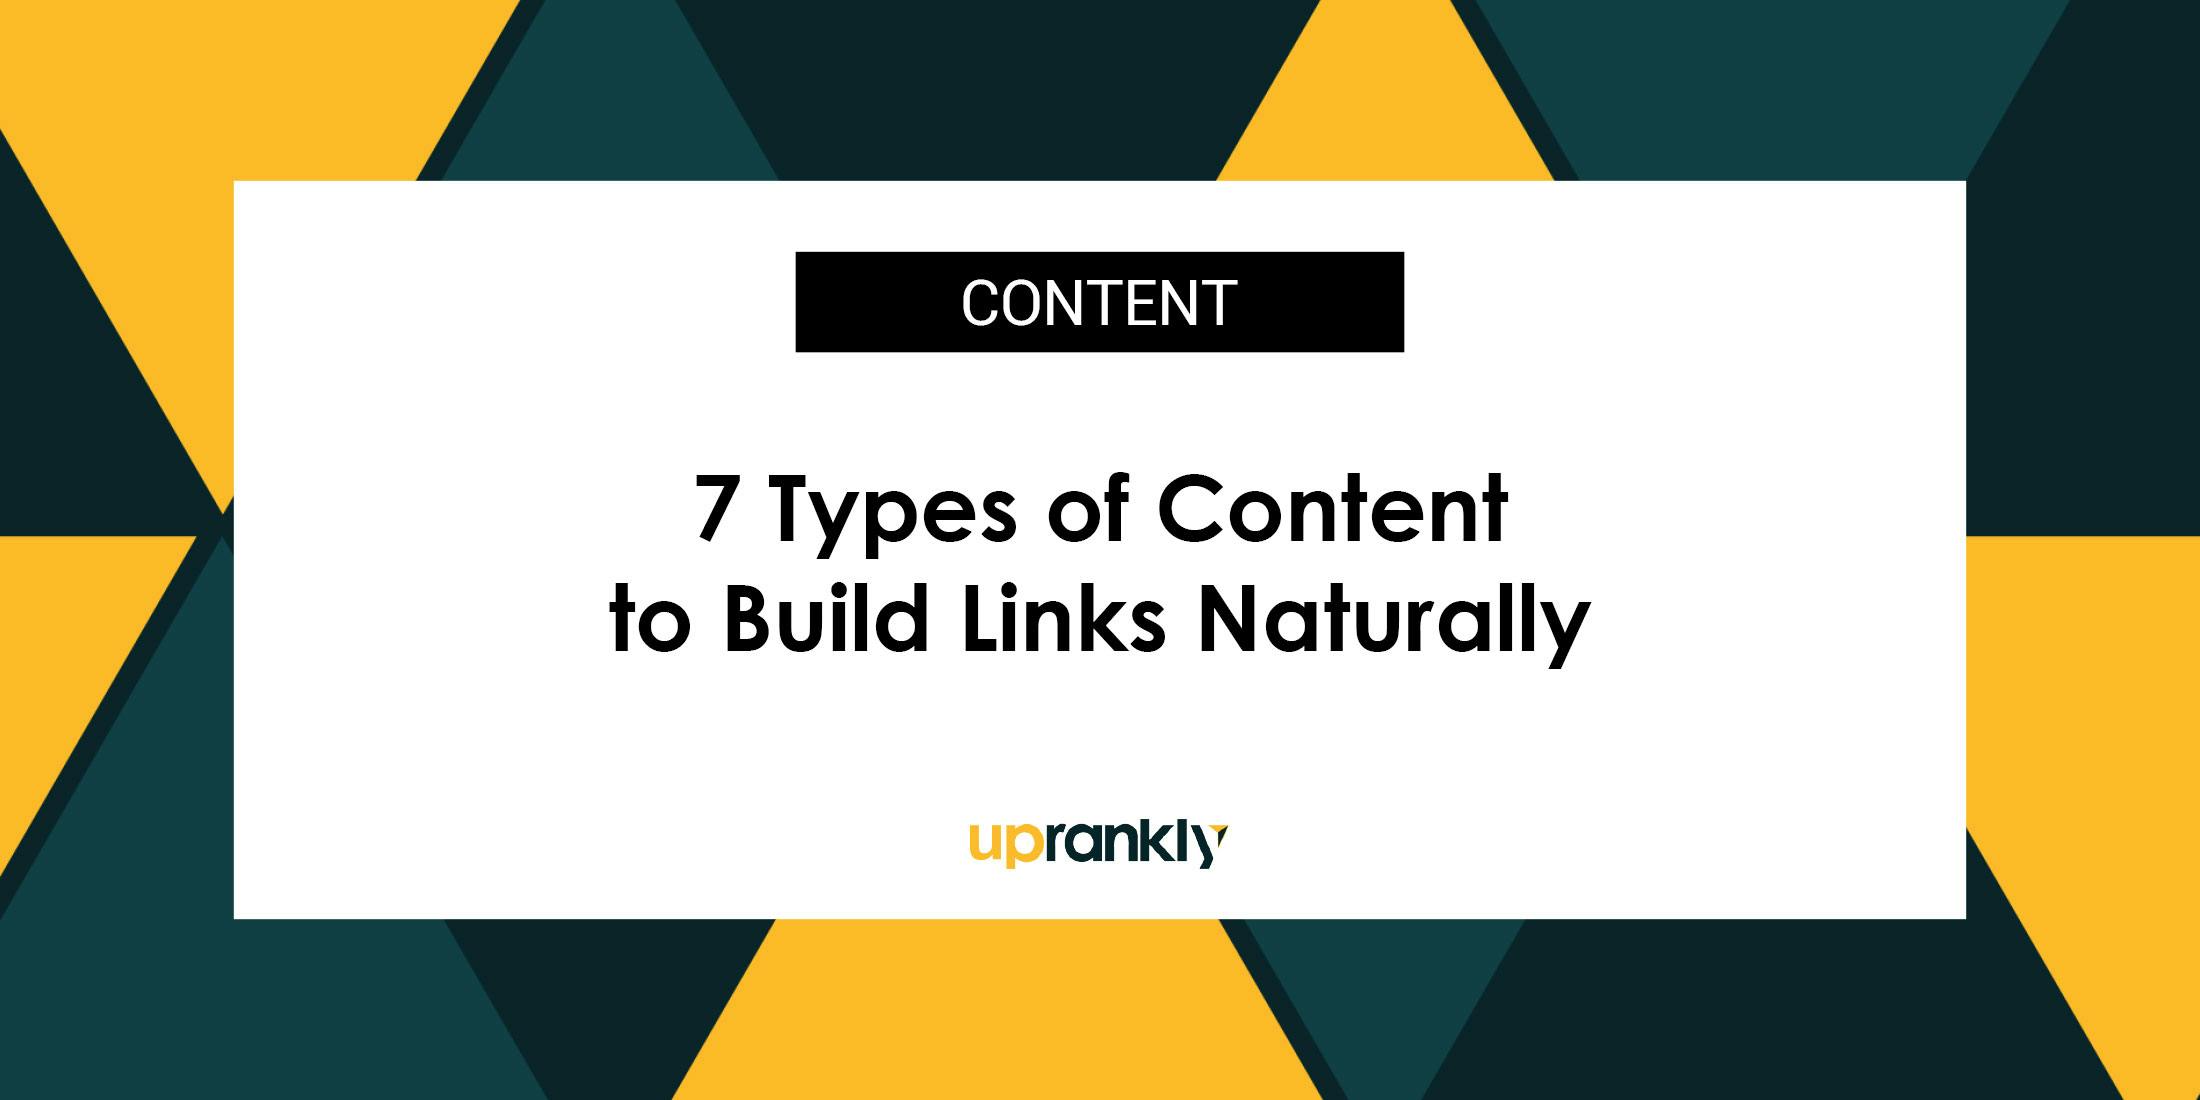 7 Types of Content to Build Links Naturally